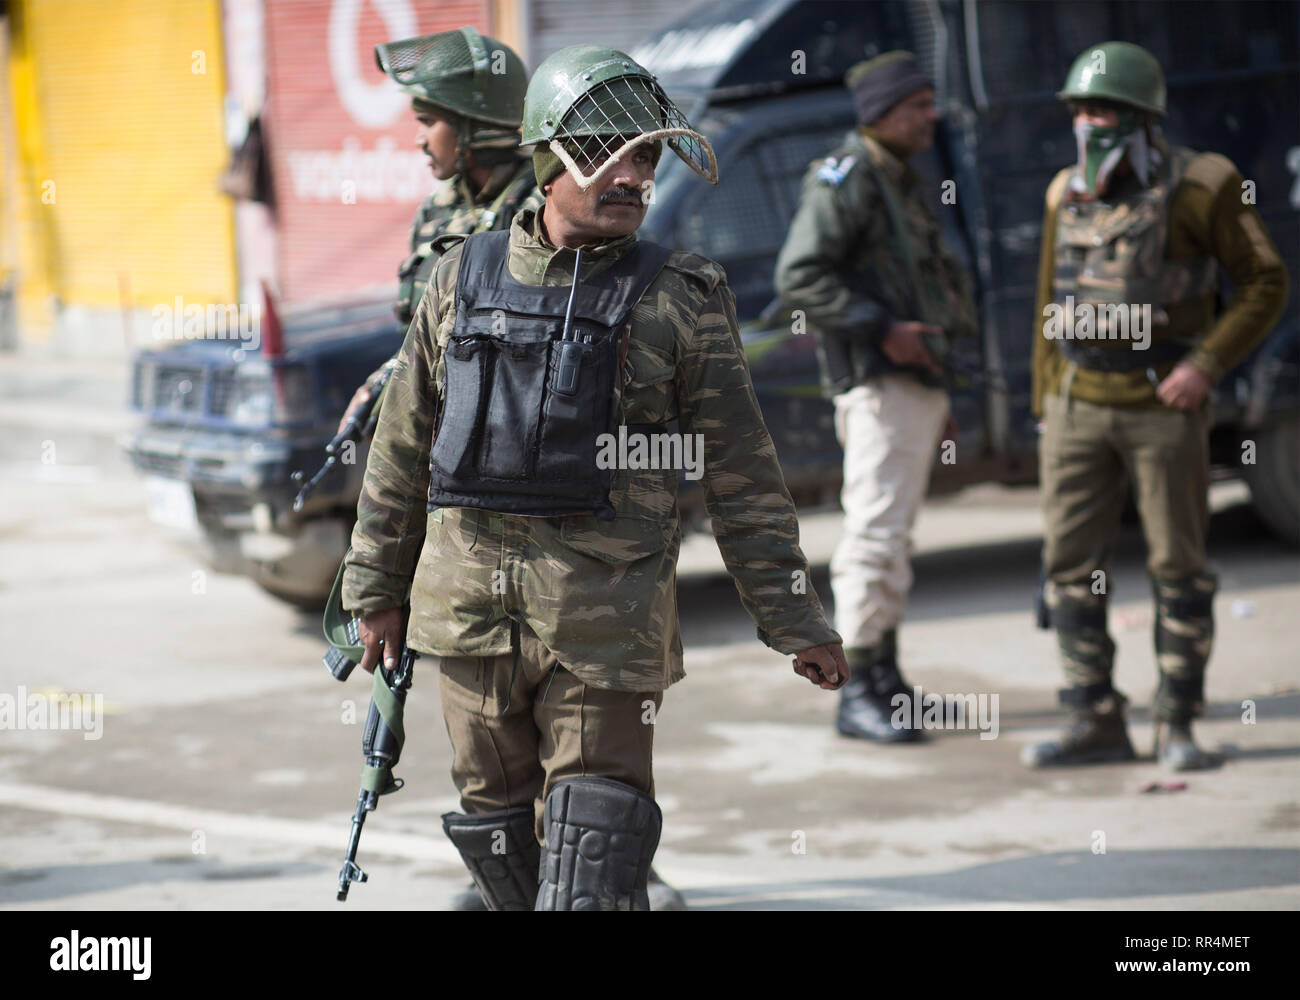 (190224) -- SRINAGAR, Feb. 24, 2019 (Xinhua) -- Indian paramilitary troopers stand guard during a security lockdown in downtown area of Srinagar, the summer capital of Indian-controlled Kashmir, Feb. 24, 2019. Indian-controlled Kashmir Sunday observed a shutdown to protest arrests of political activists and move of legally abrogating a law - Article 35 A of Indian constitution - that confers special status to the region. The strike call was given by the region's separatist groups under the leadership Joint Resistance Leadership (JRL) condemning arrests and fearing tampering with Article 35 A w Stock Photo